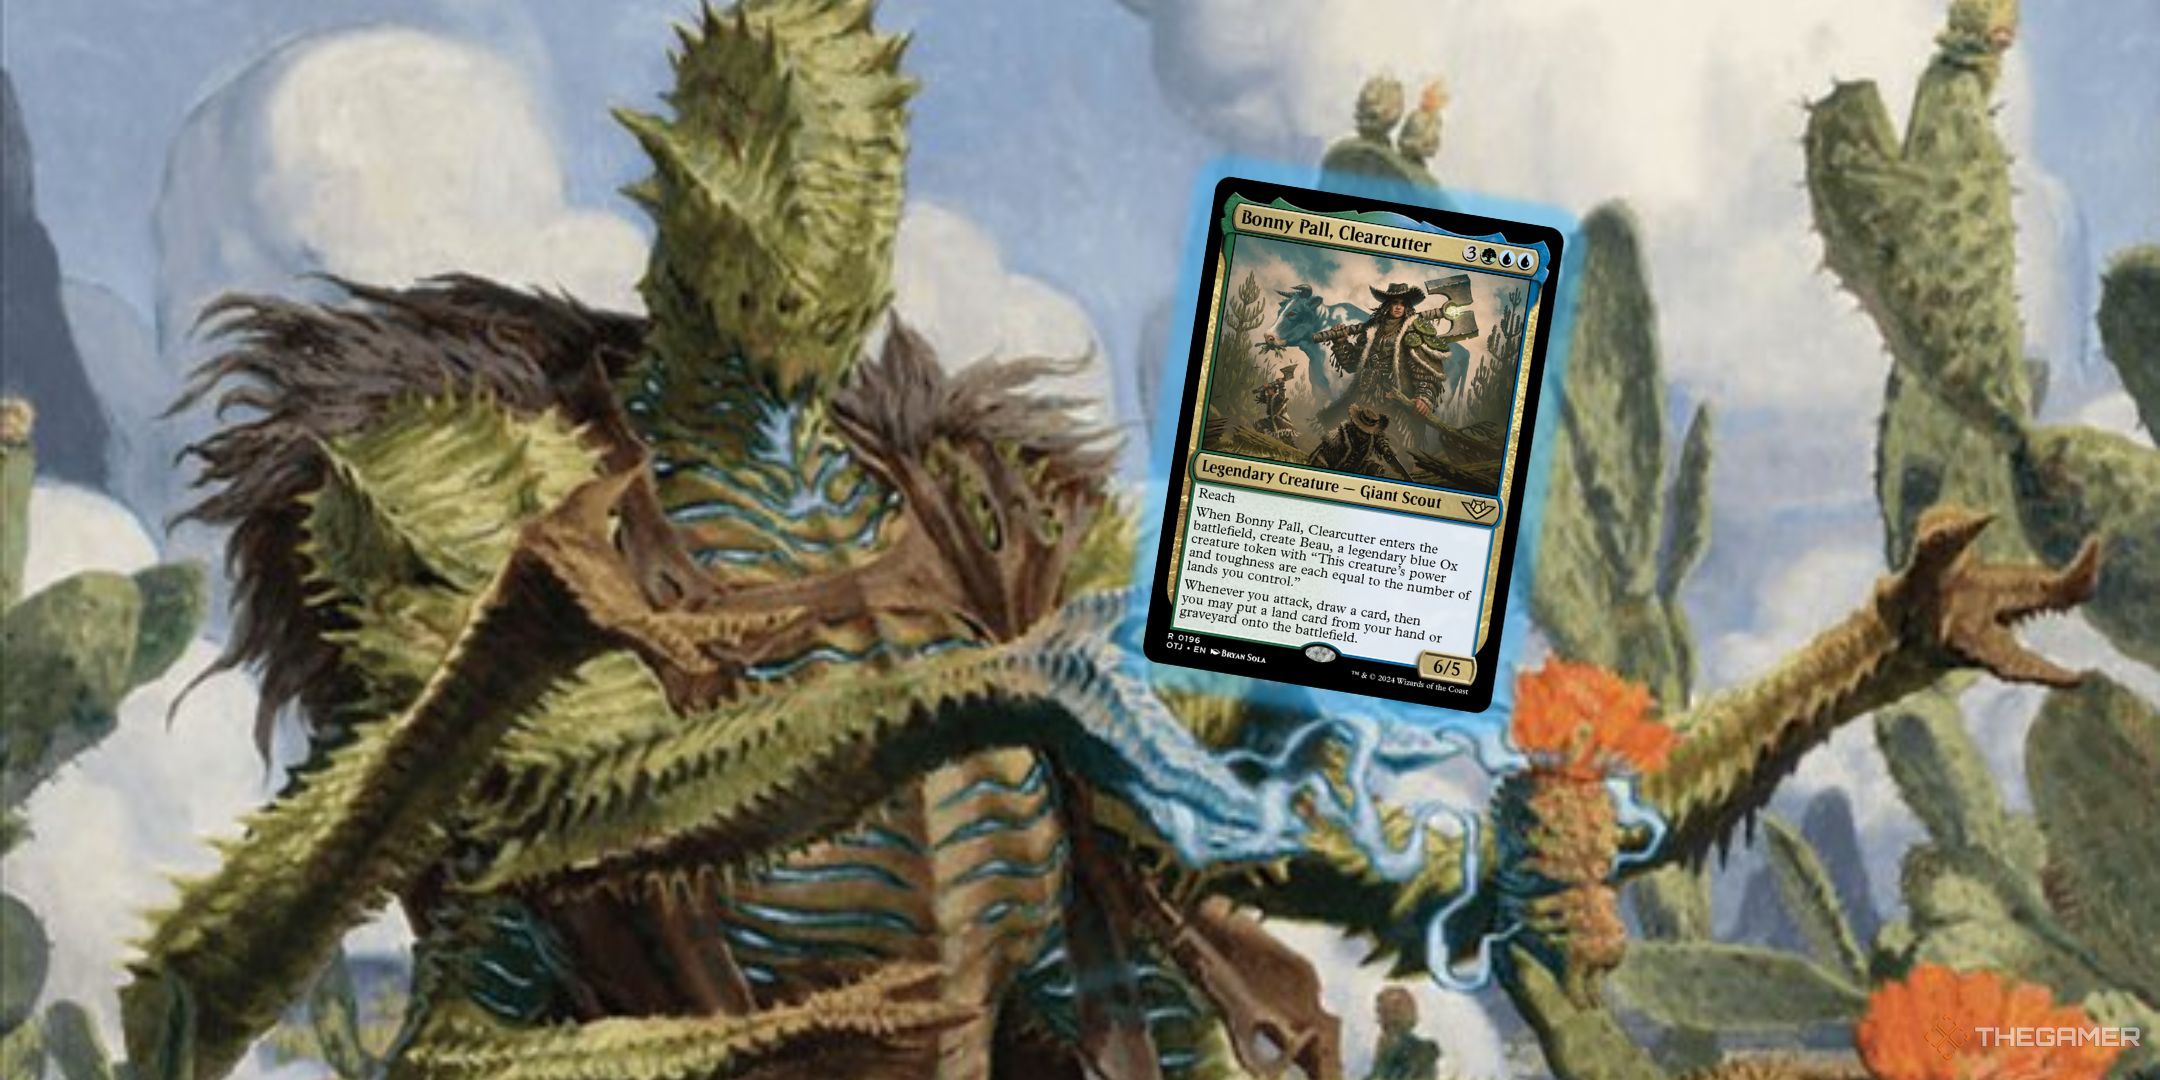 Magic: The Gathering card art for Bristly Bill, Spine Sower by Daniel Zrom + card image of Bonny Pall, Clearcutter